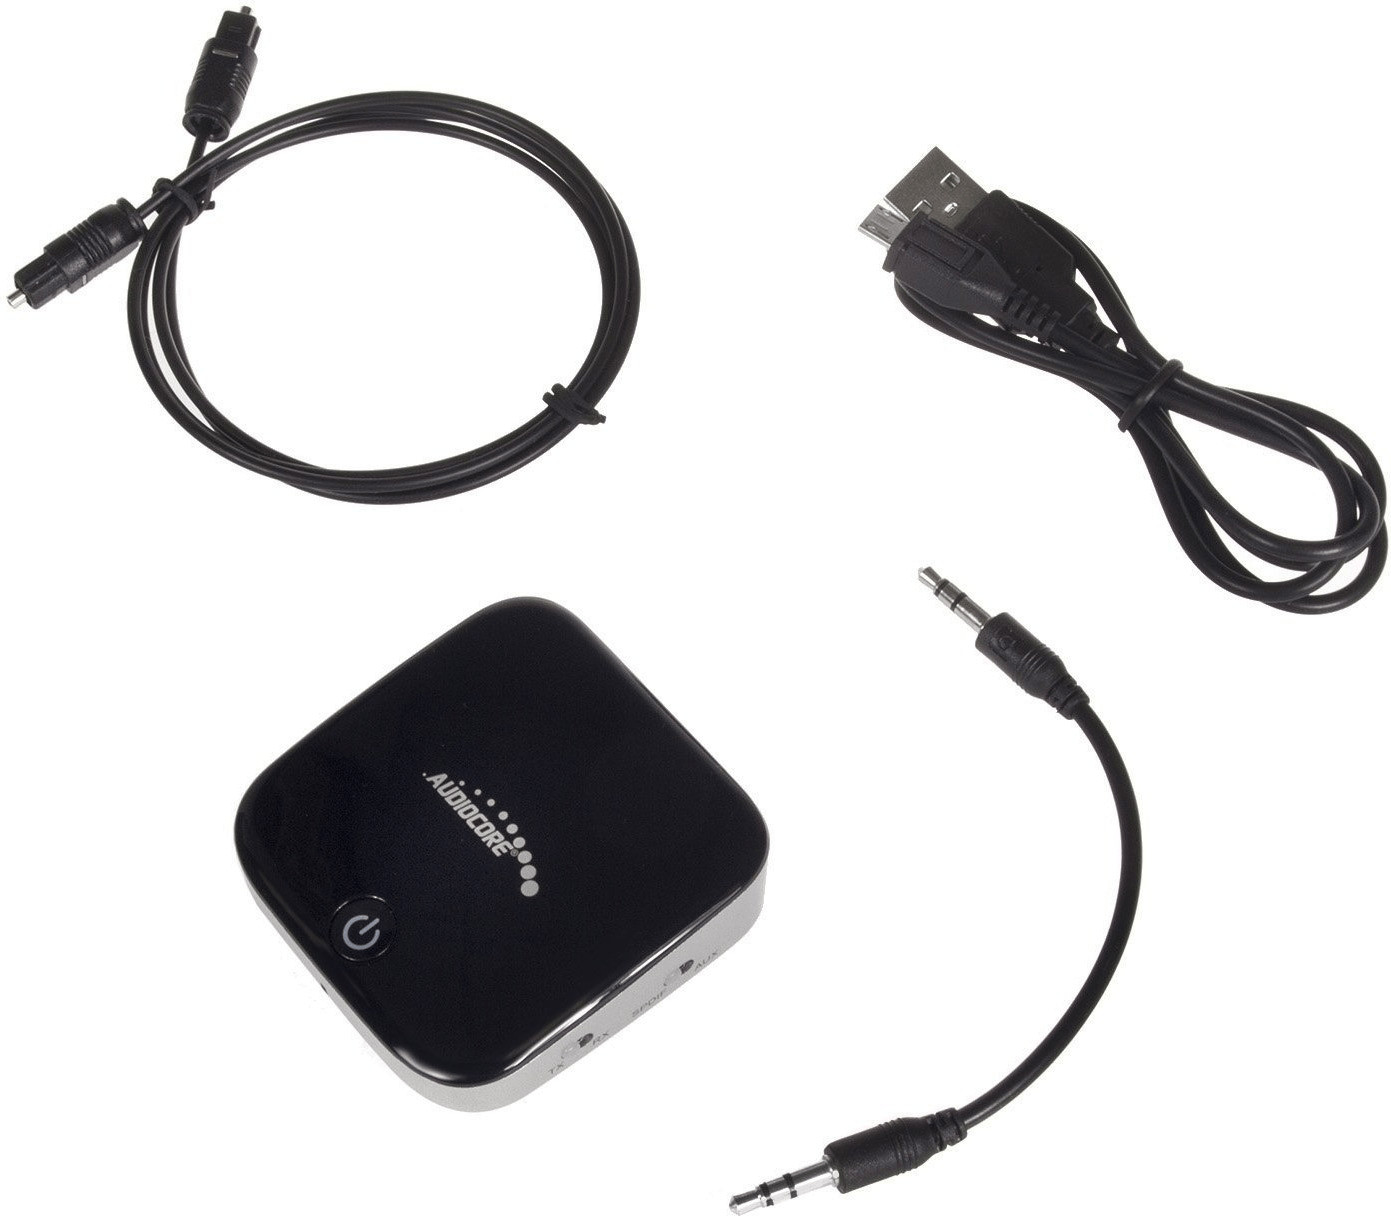 AudioCore AC830 2 in 1 Bluetooth Adapter ab 29,93 €